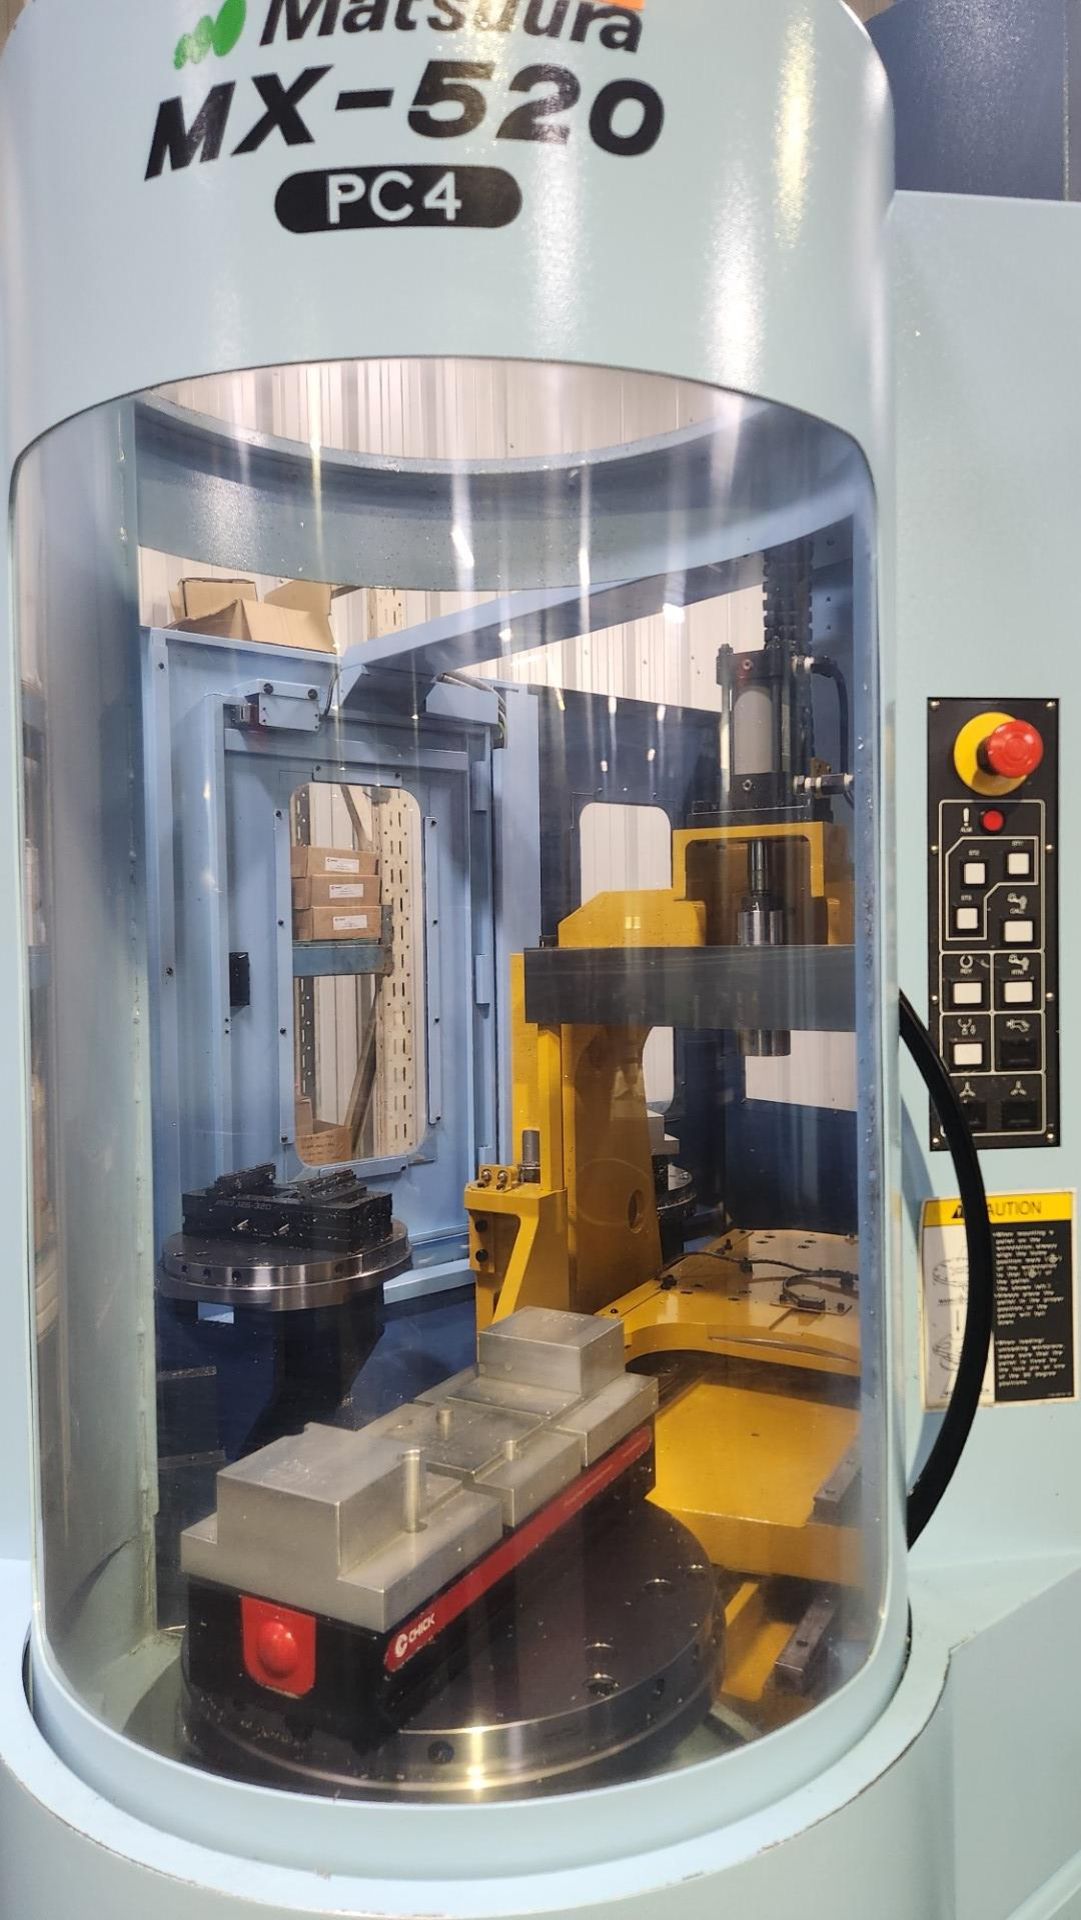 MATSUURA (2019) MX-520 PC4 MULTI-PALLET FULL 5-AXIS HIGH-SPEED CNC VERTICAL MACHINING CENTER WITH - Image 29 of 30